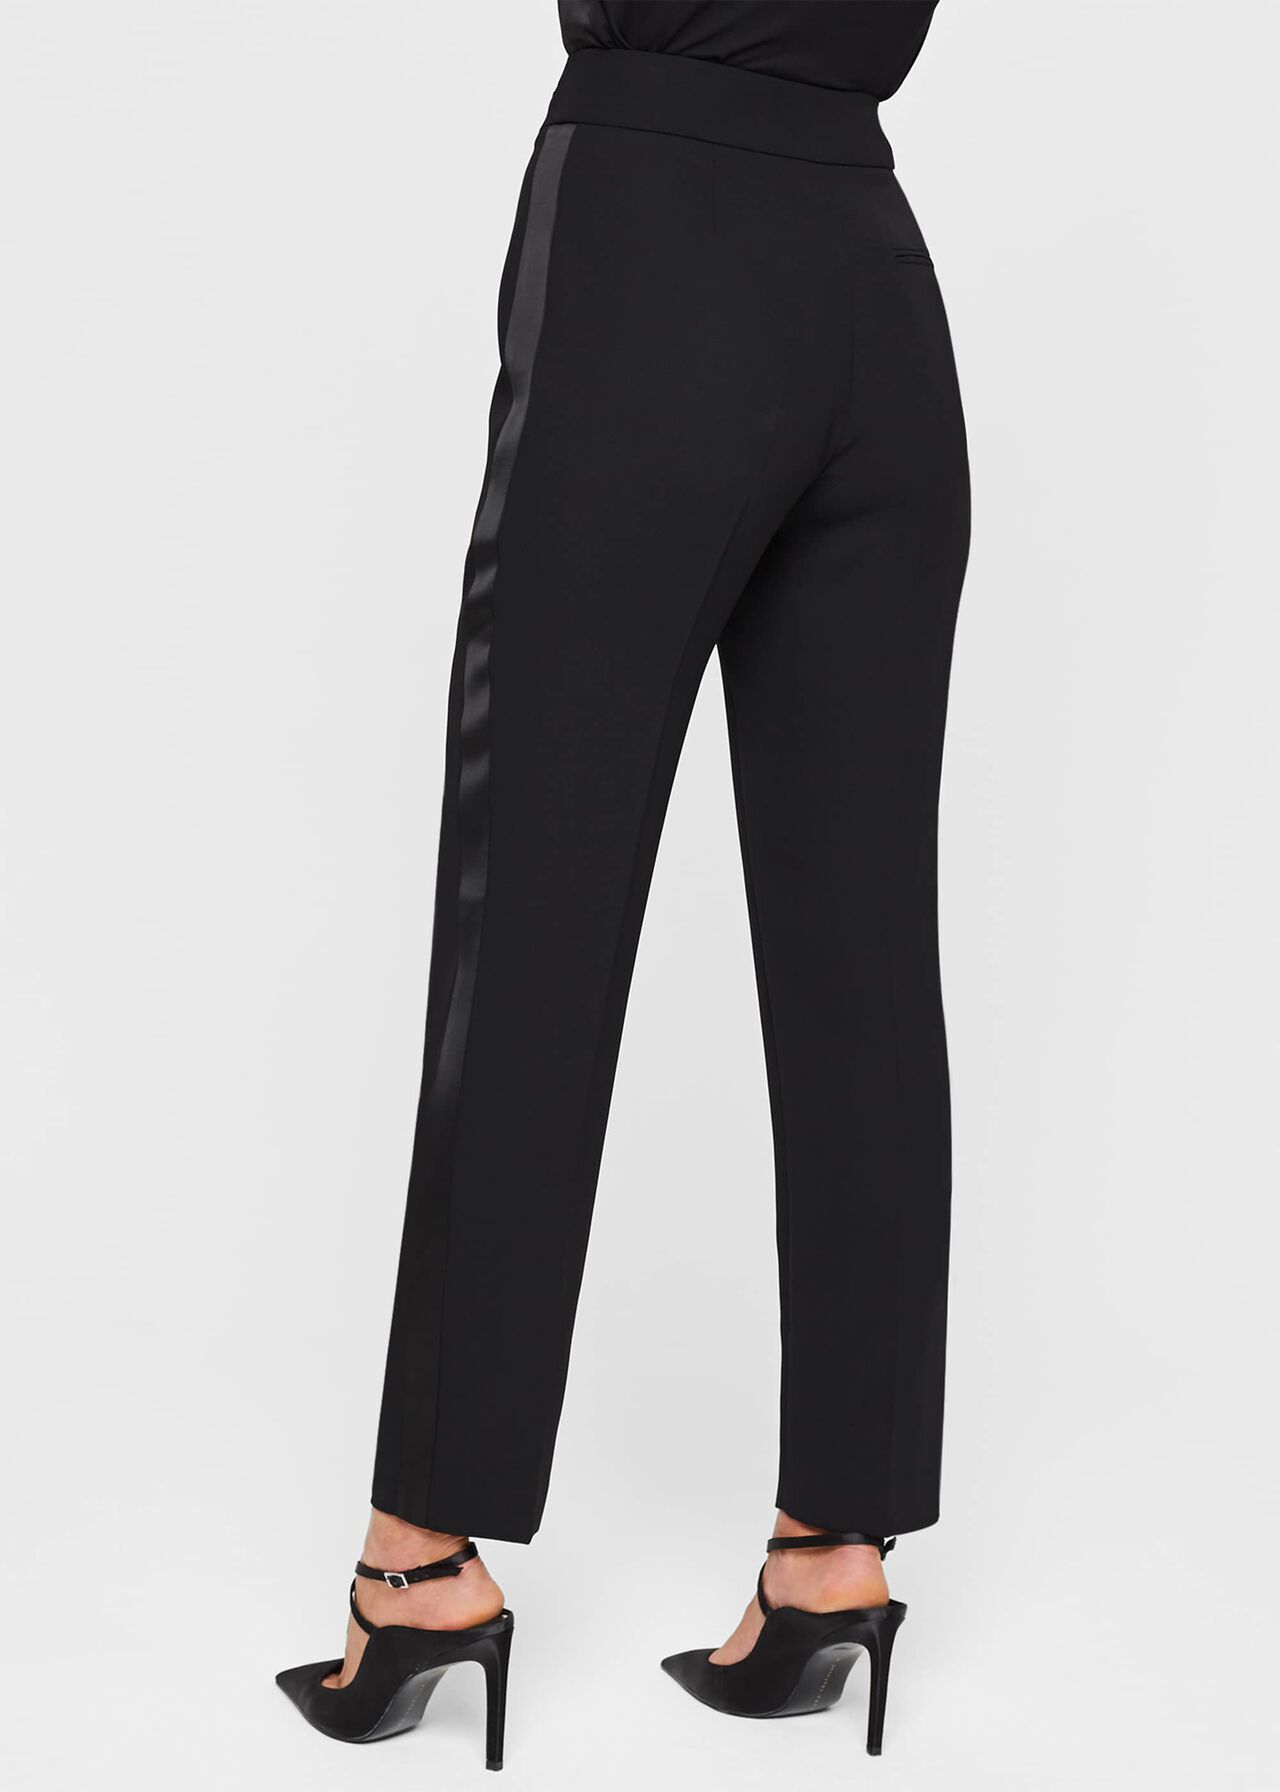 Lolicia Tux Trousers